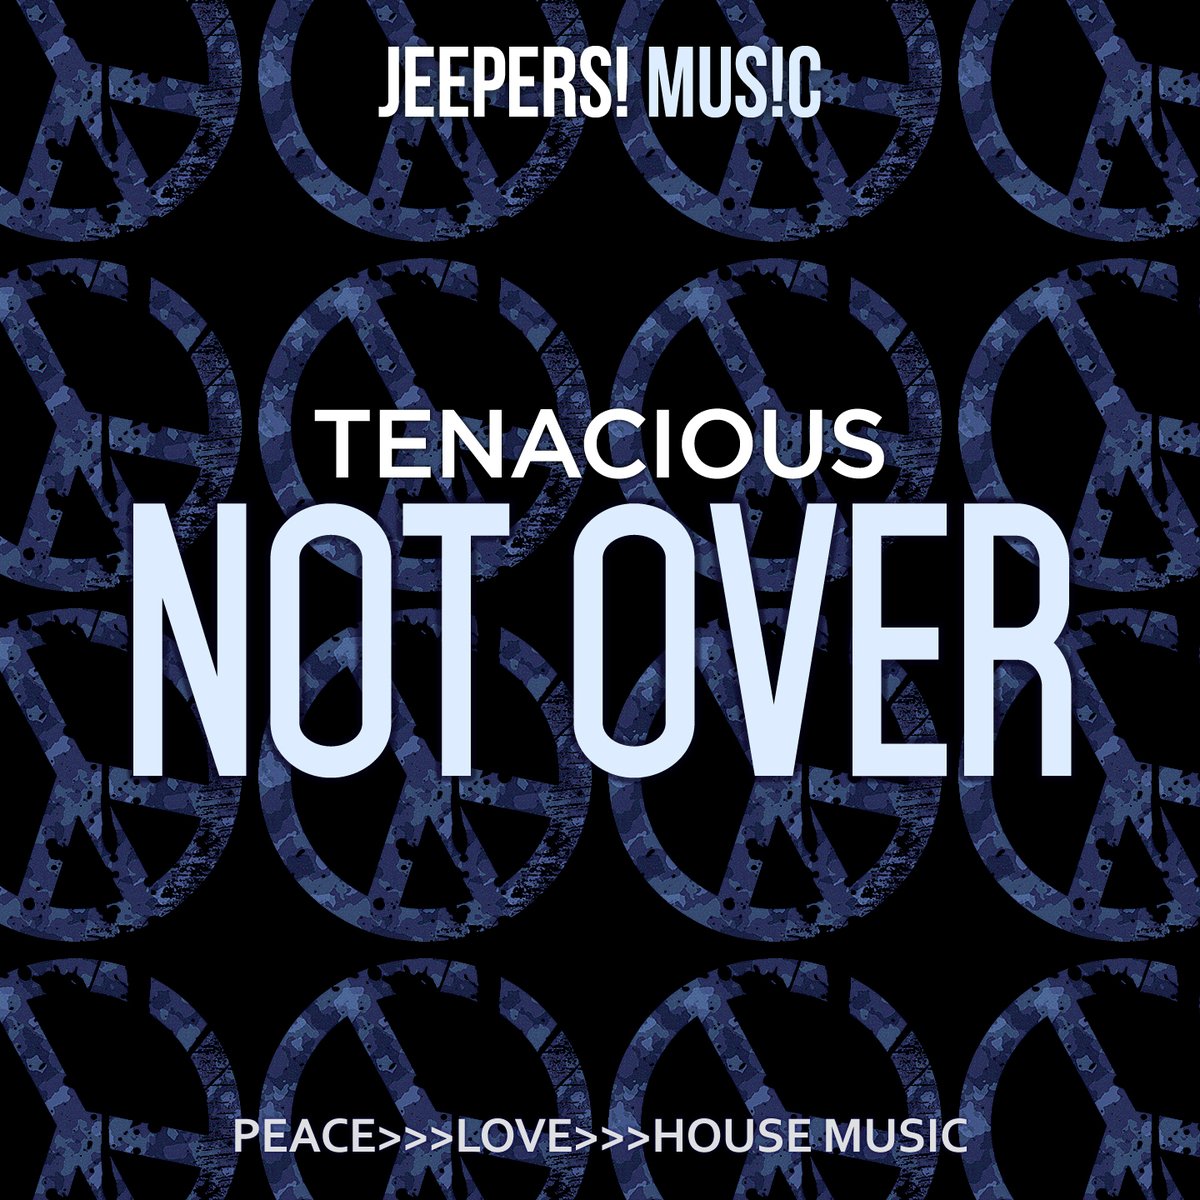 New @tenaciousuk single - 'Not Over' coming soon on JEEPERS! DJ promos have just gone out, so check your in-boxes DJs. ‘Not Over’ is a massive tech-house track with a strong vocal hook, tight percussive groove, deep stabs and a serious bass-line. @traxsource exclusive - 10 April.